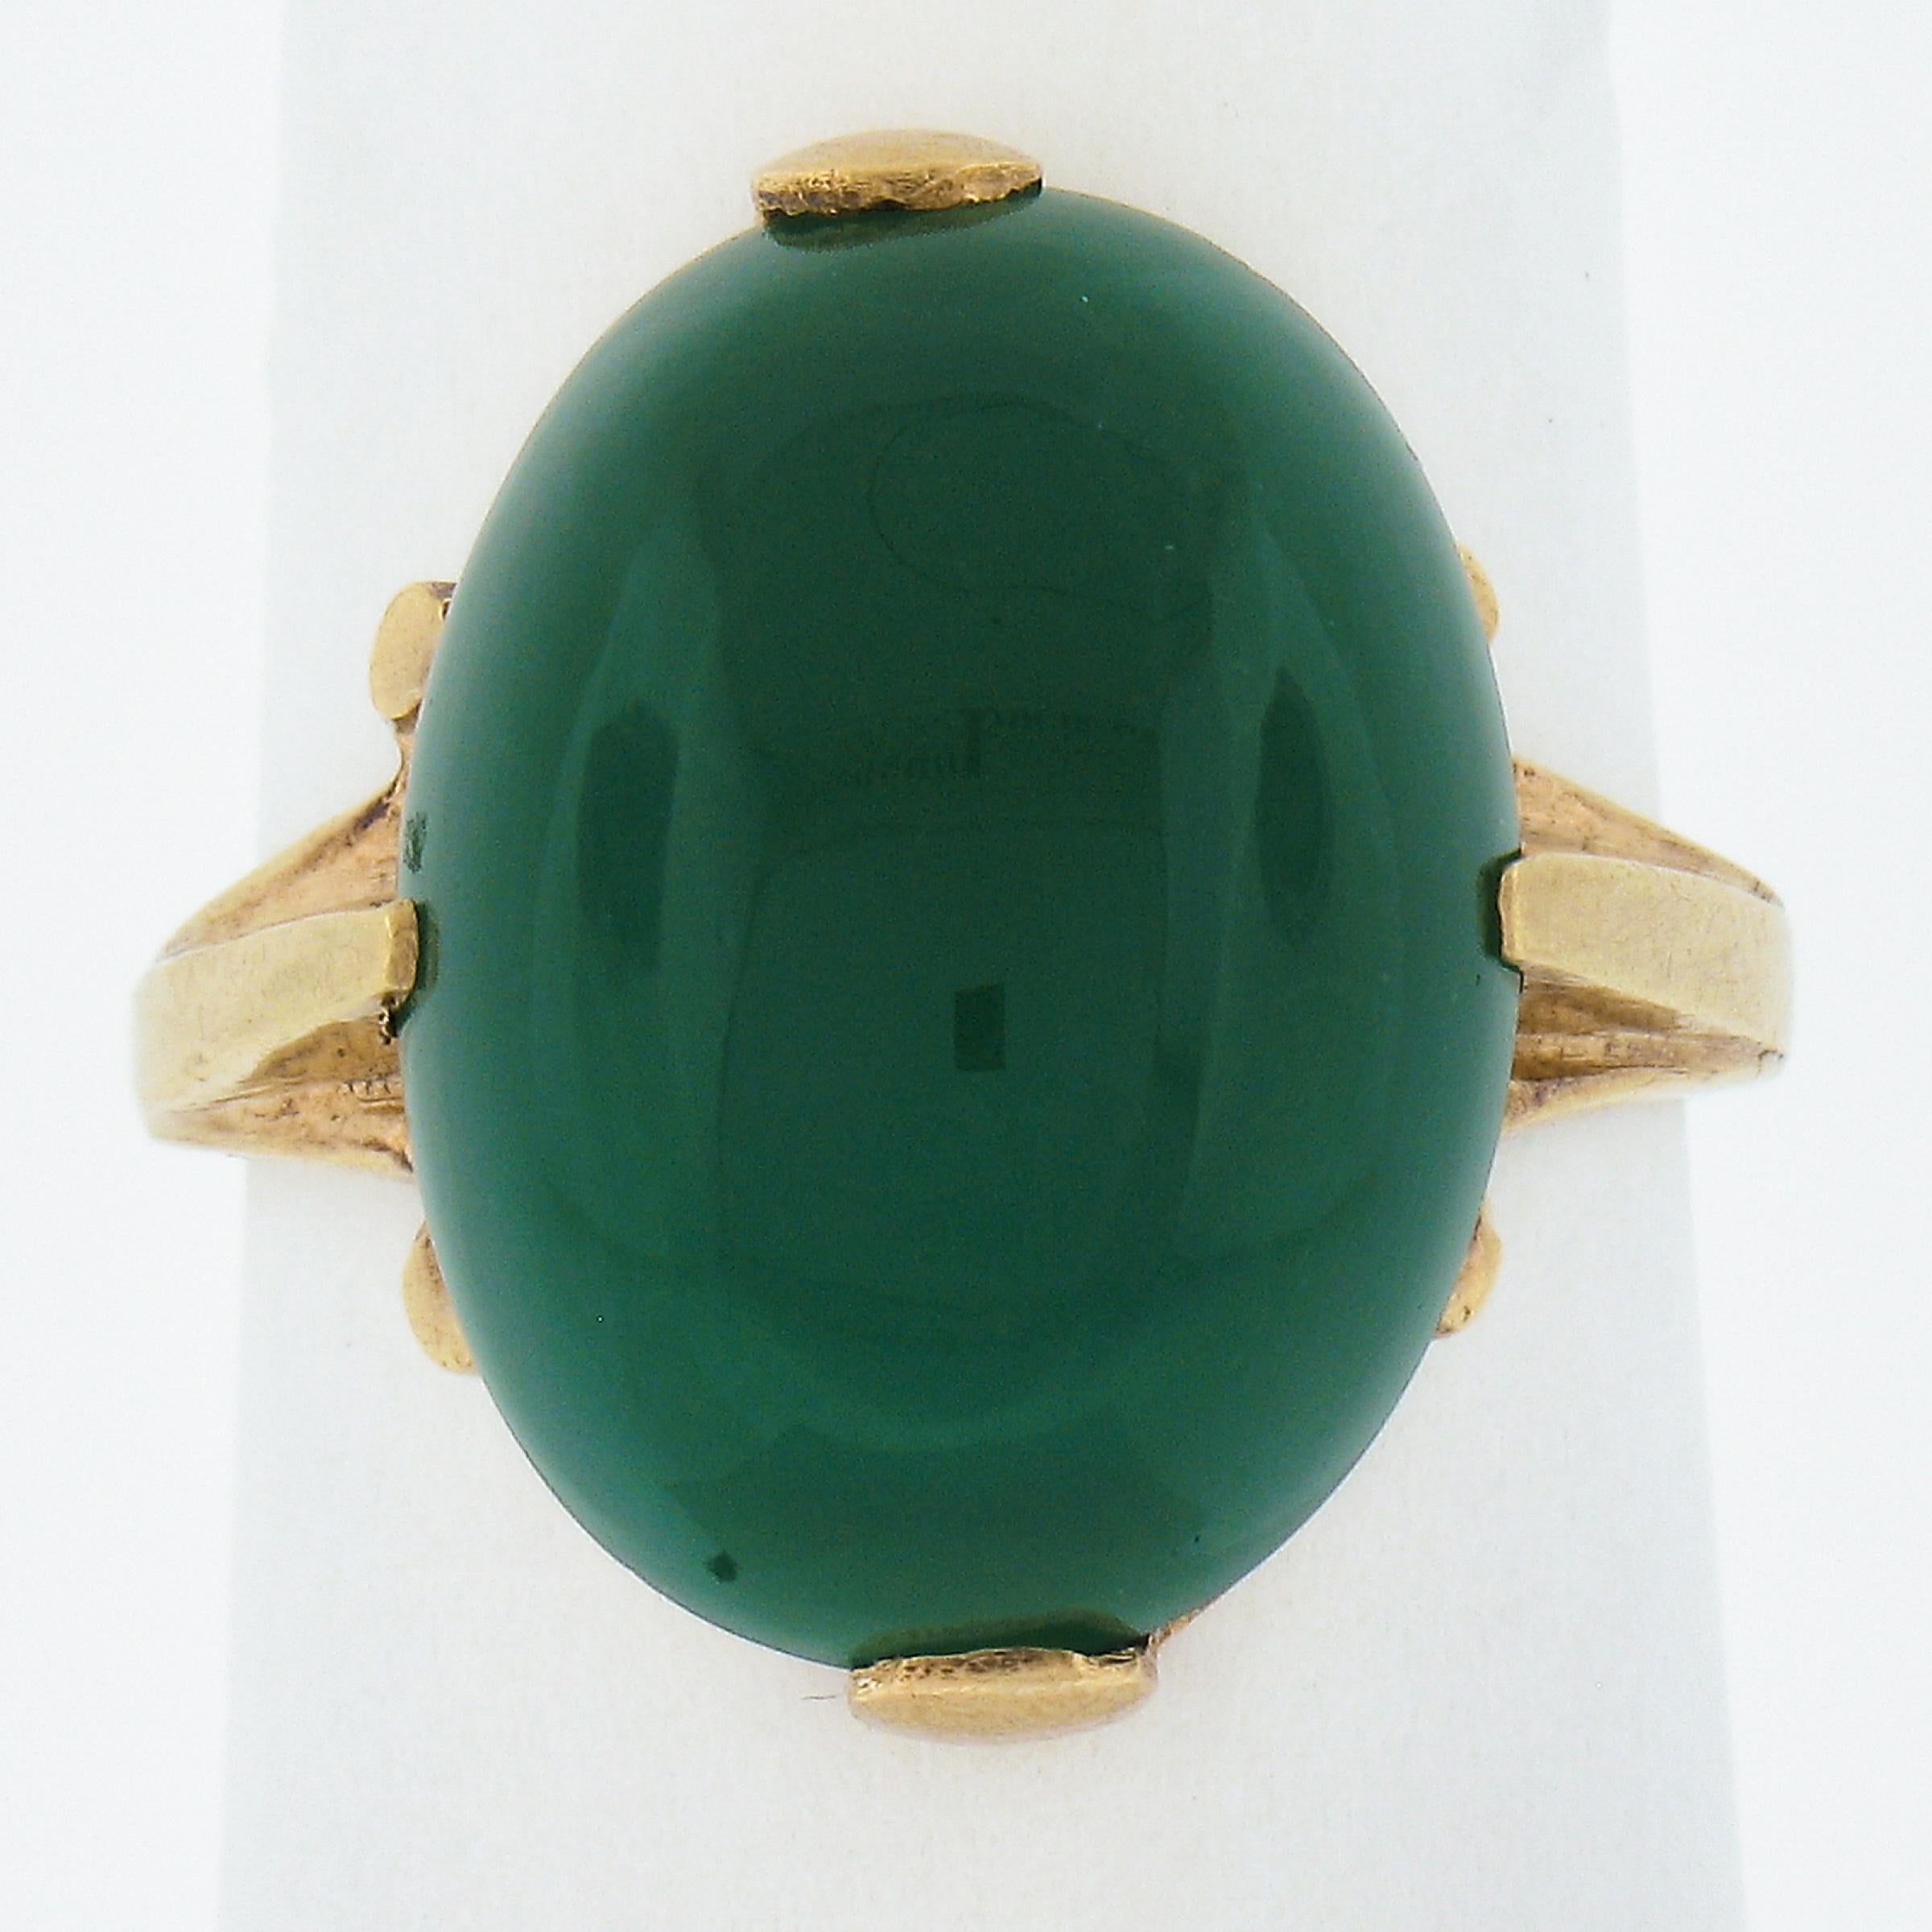 --Stone(s):--
(1) Natural Genuine Chrysoprase- Panel Prong Set - Deep Apple Green Color - 15.6x12mm (approx.)

Material: 14K Solid Yellow Gold
Weight: 5.01 Grams
Ring Size: 5.5 (Fitted on a finger. We can custom size this ring. Please contact us